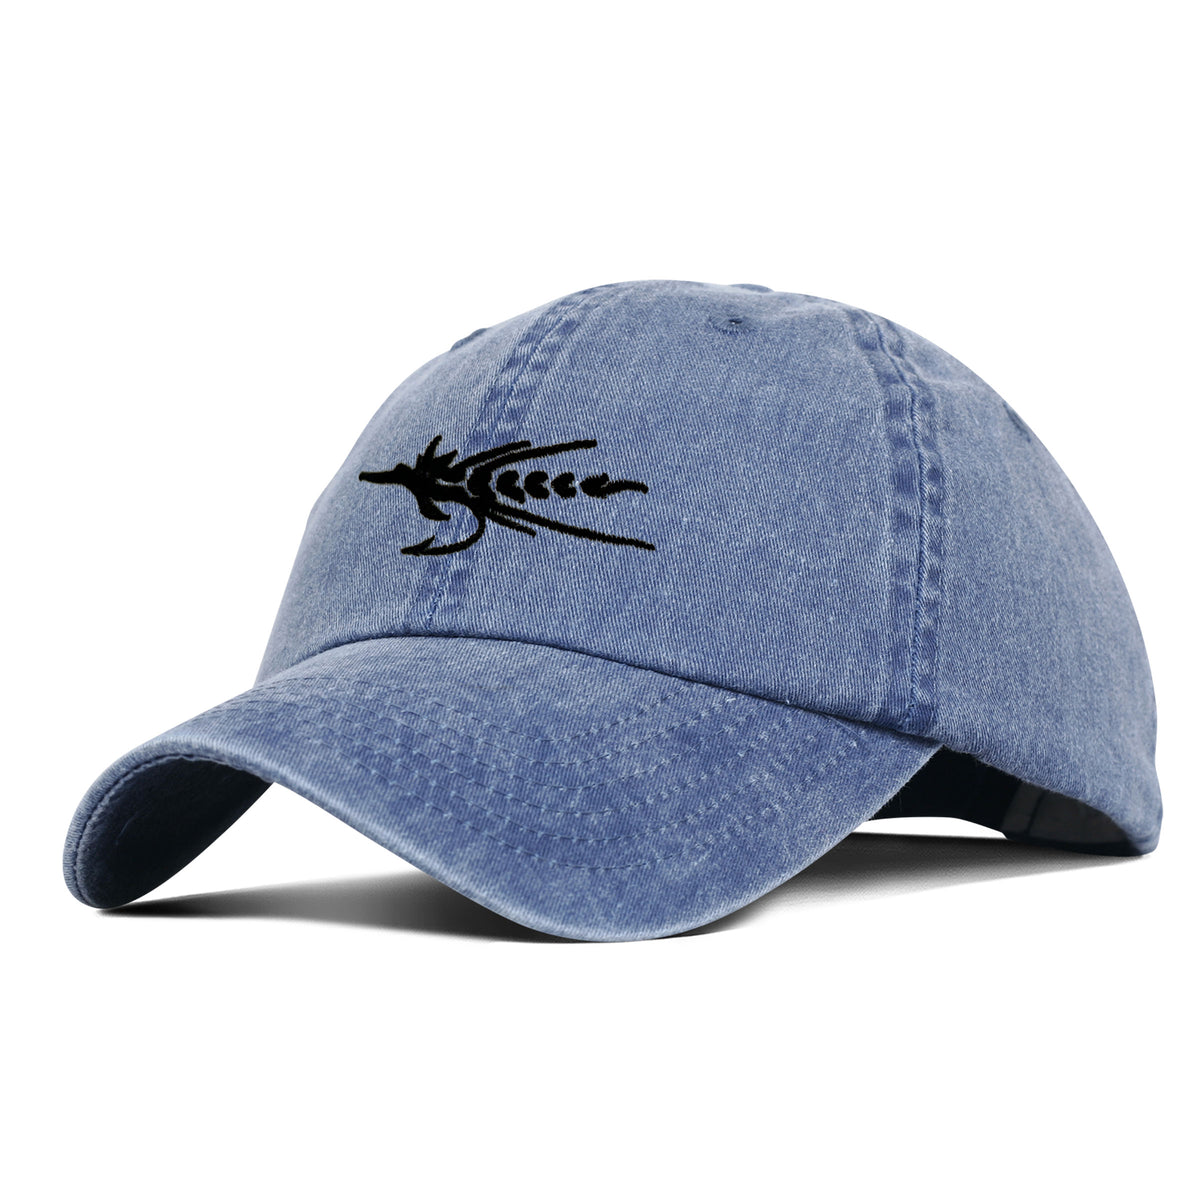 Black Fly Embroidered Hat Blue Jean